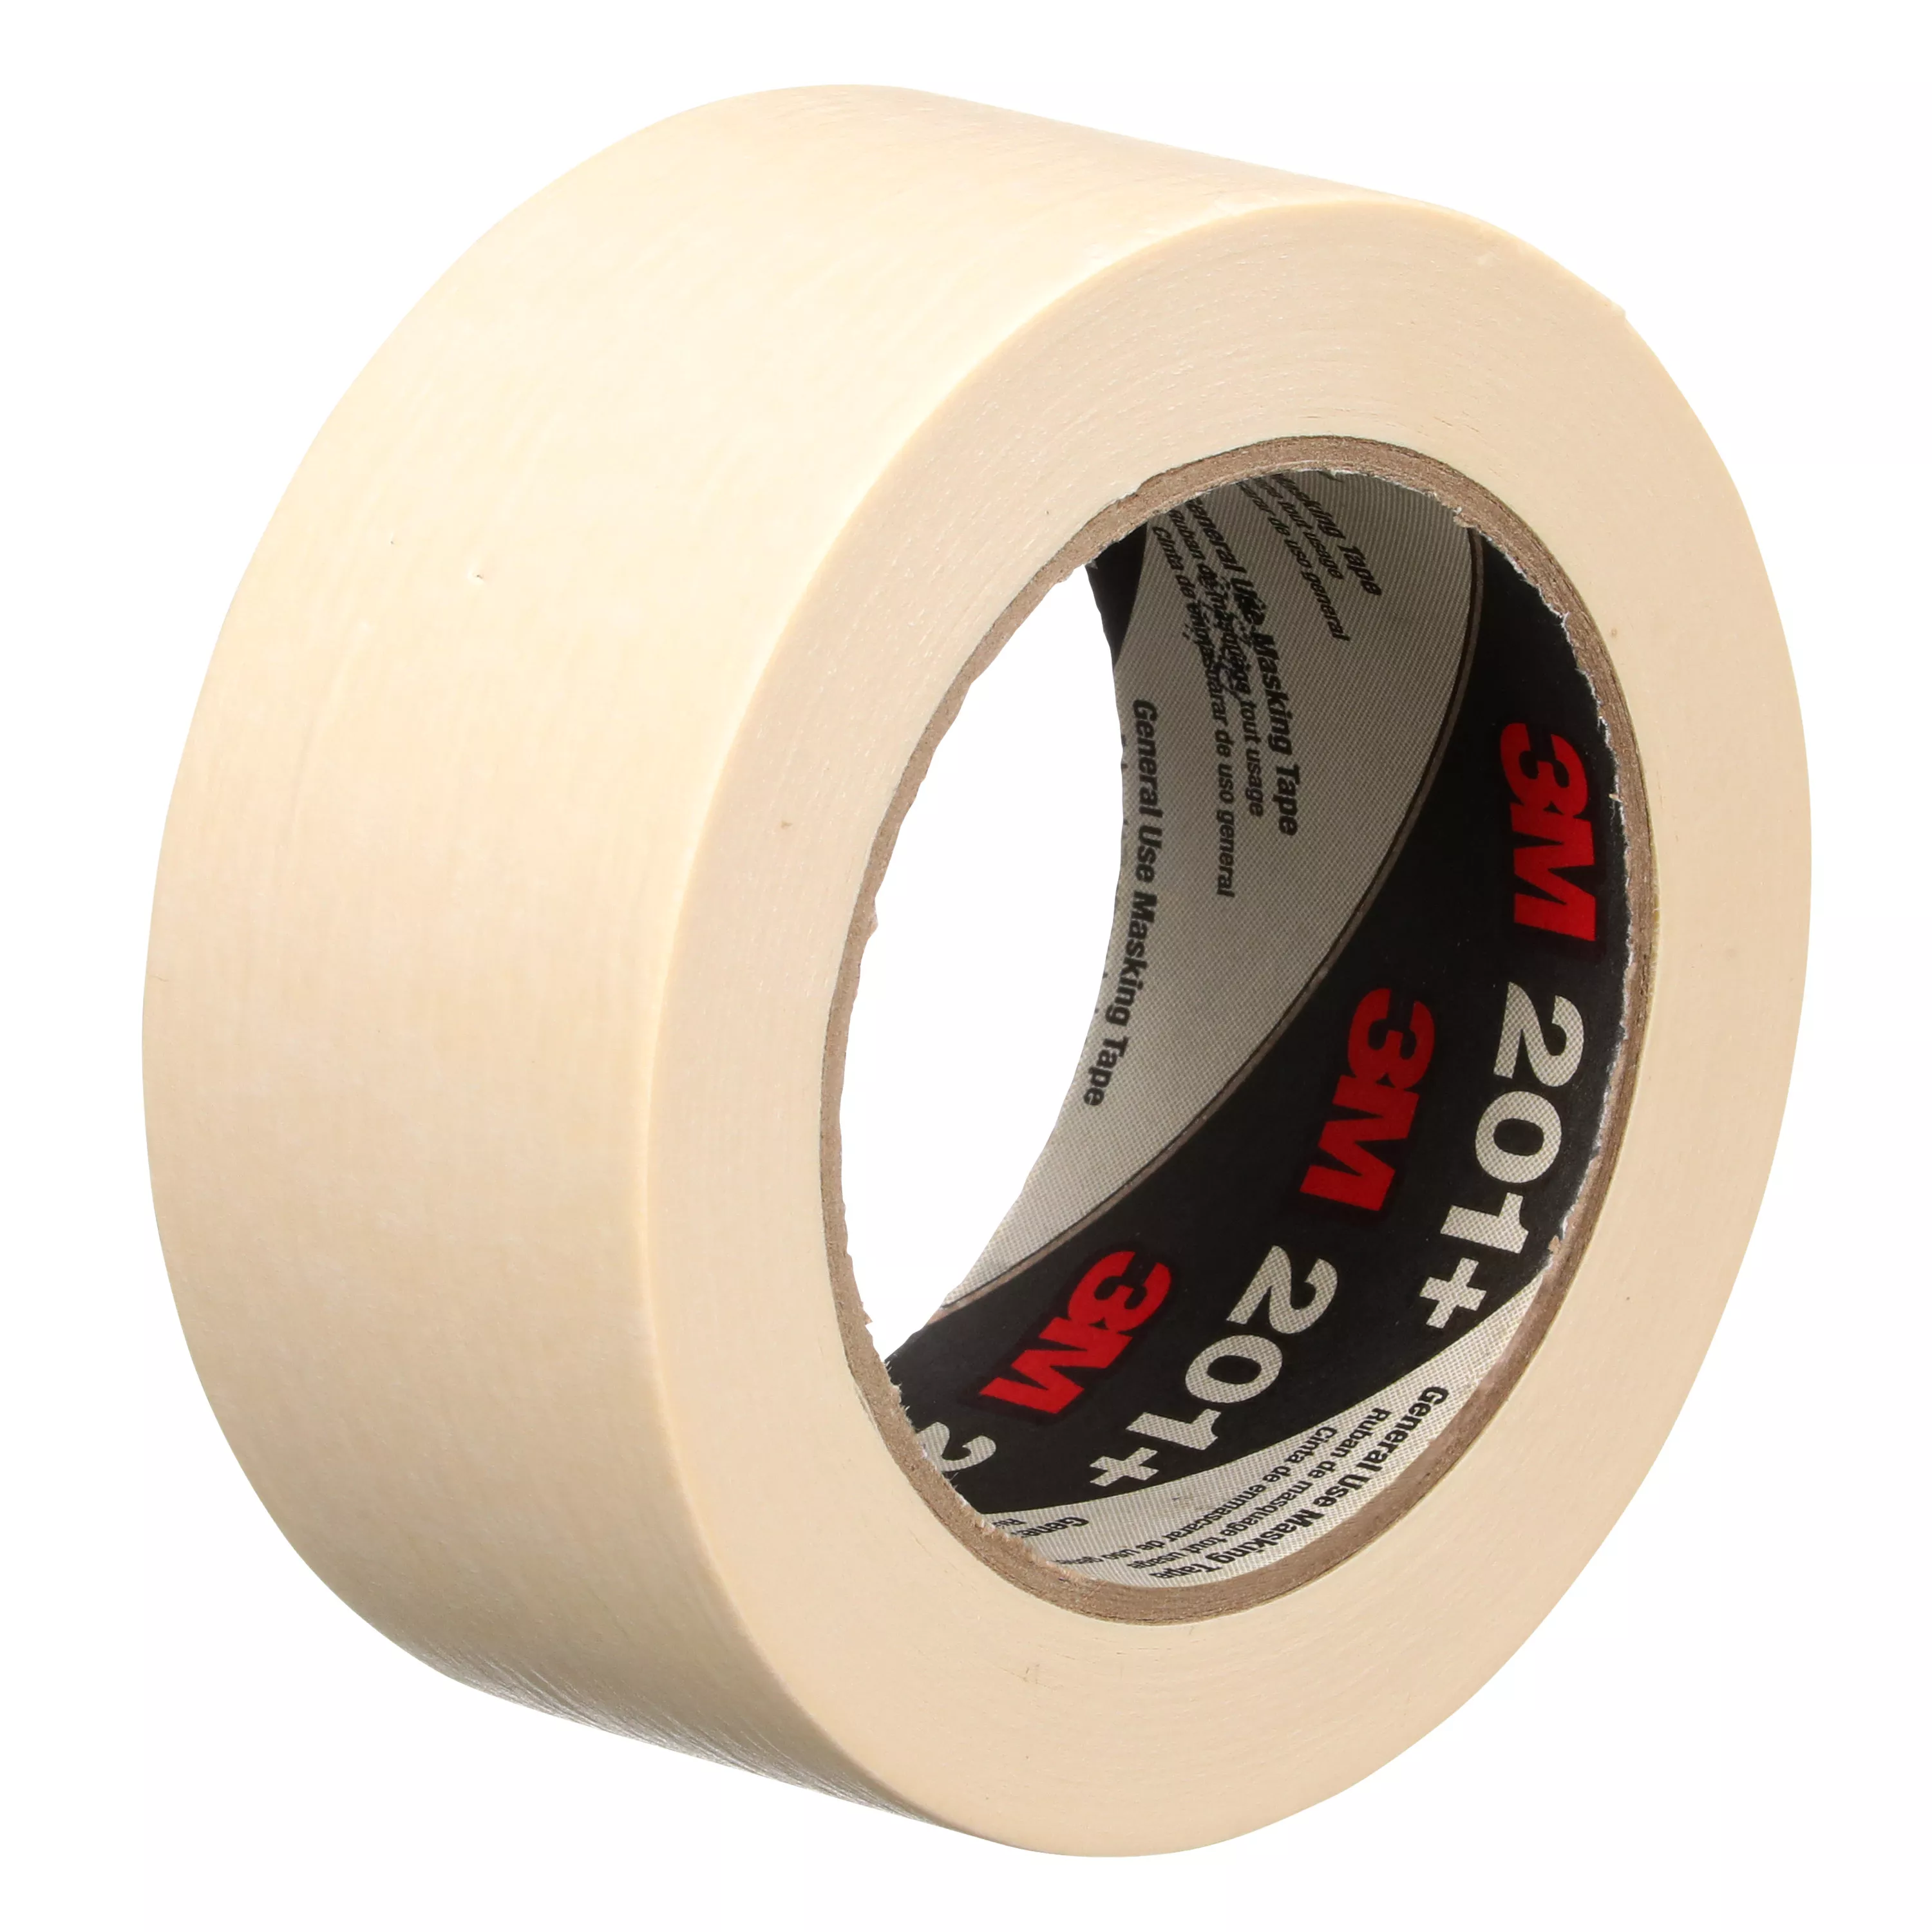 3M™ General Use Masking Tape 201+, Tan, 48 mm x 55 m, 4.4 mil, 24
Roll/Case, Individually Wrapped Conveniently Packaged